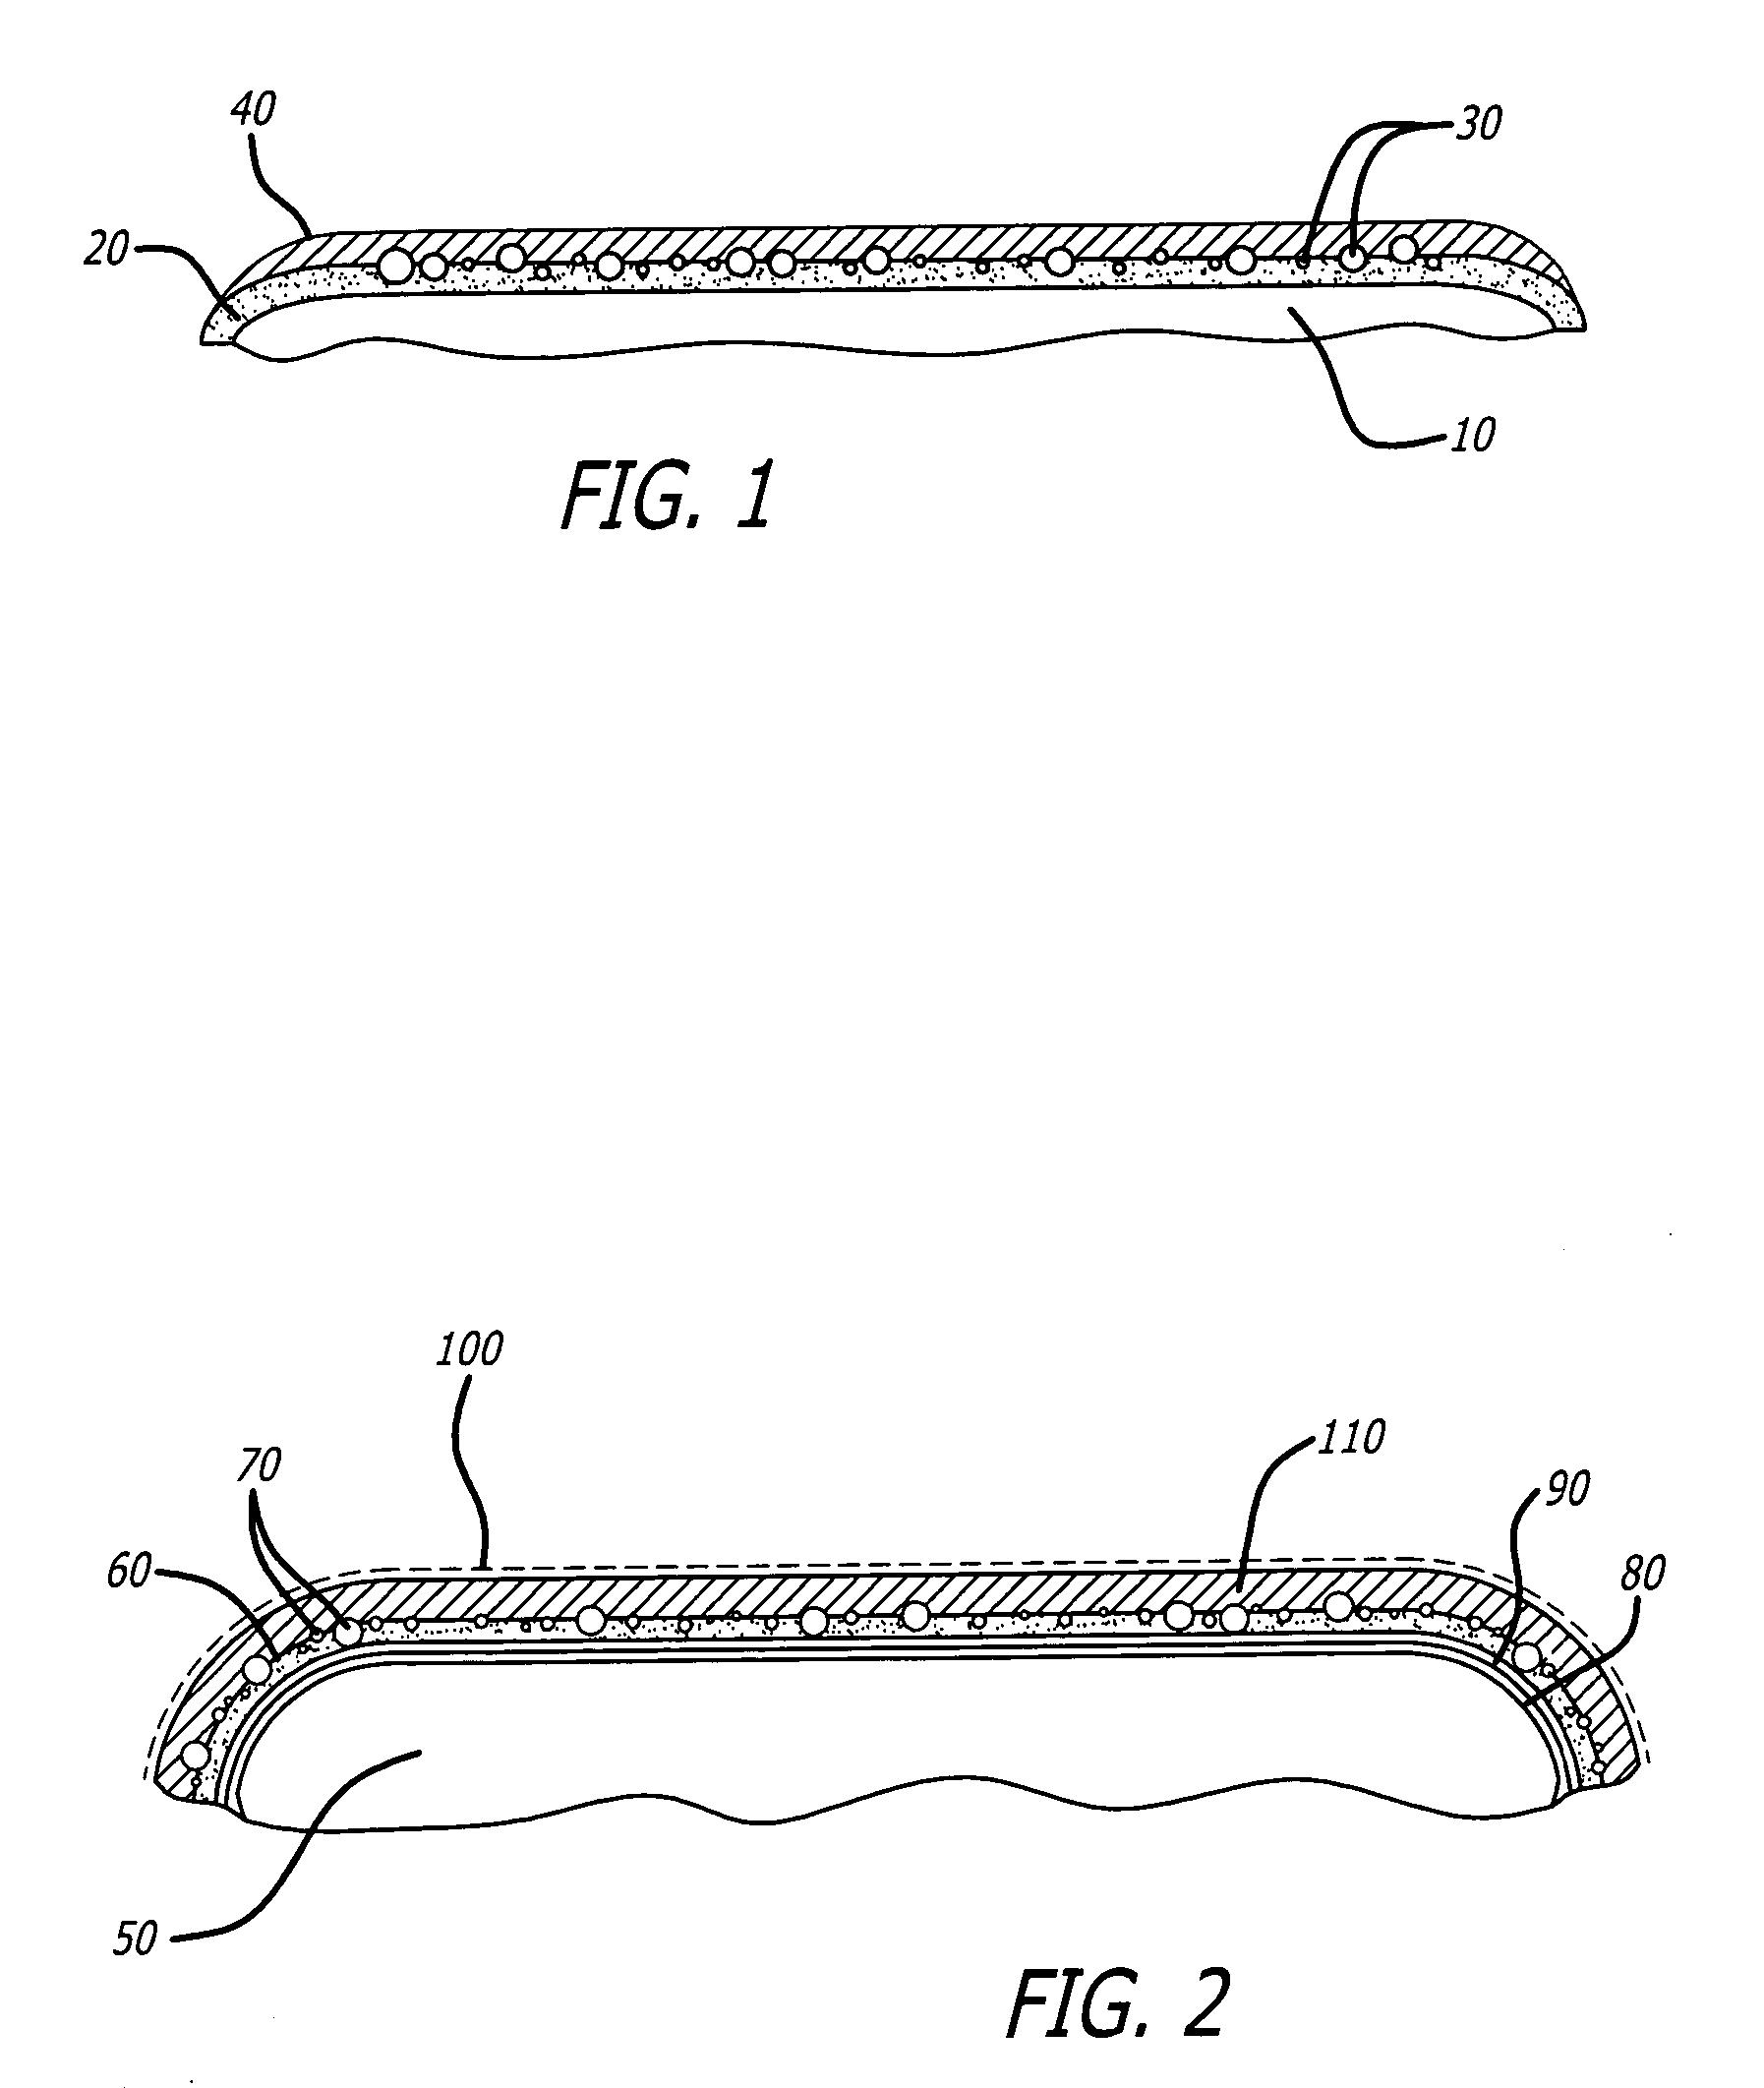 Methods and devices for enhanced adhesion between metallic substrates and bioactive material-containing coatings